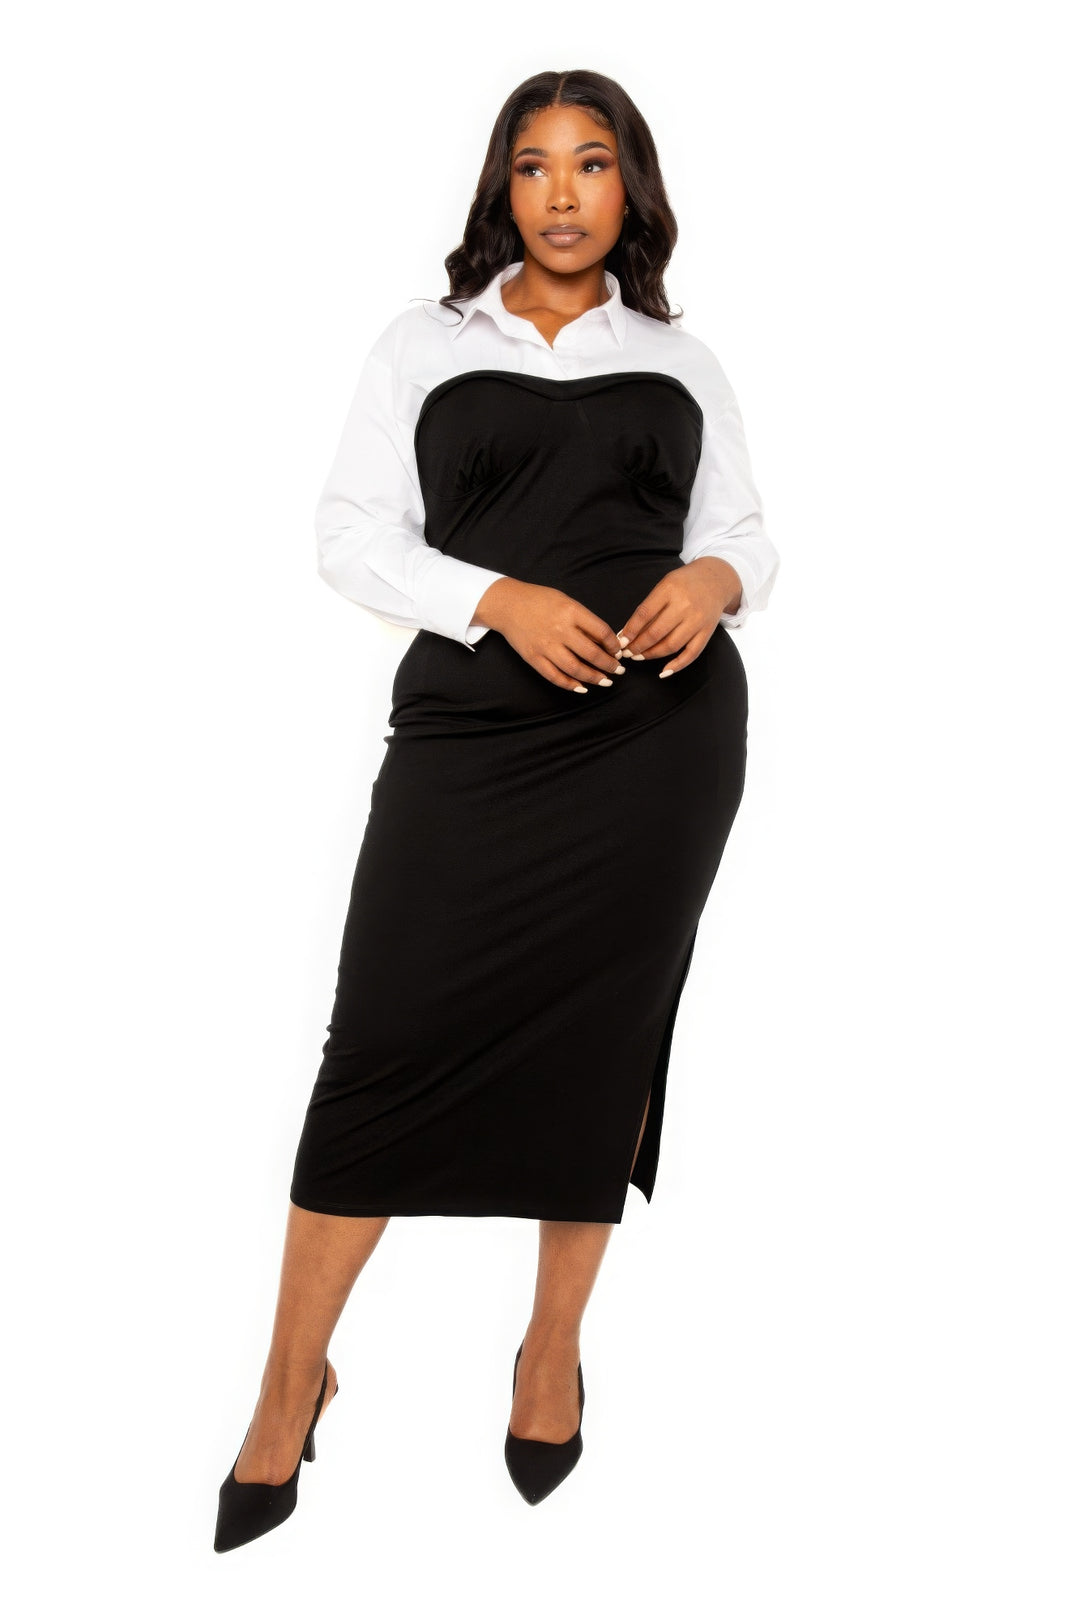 Women’s Collared Shirt Bodycon Midi Dress With Side Slit